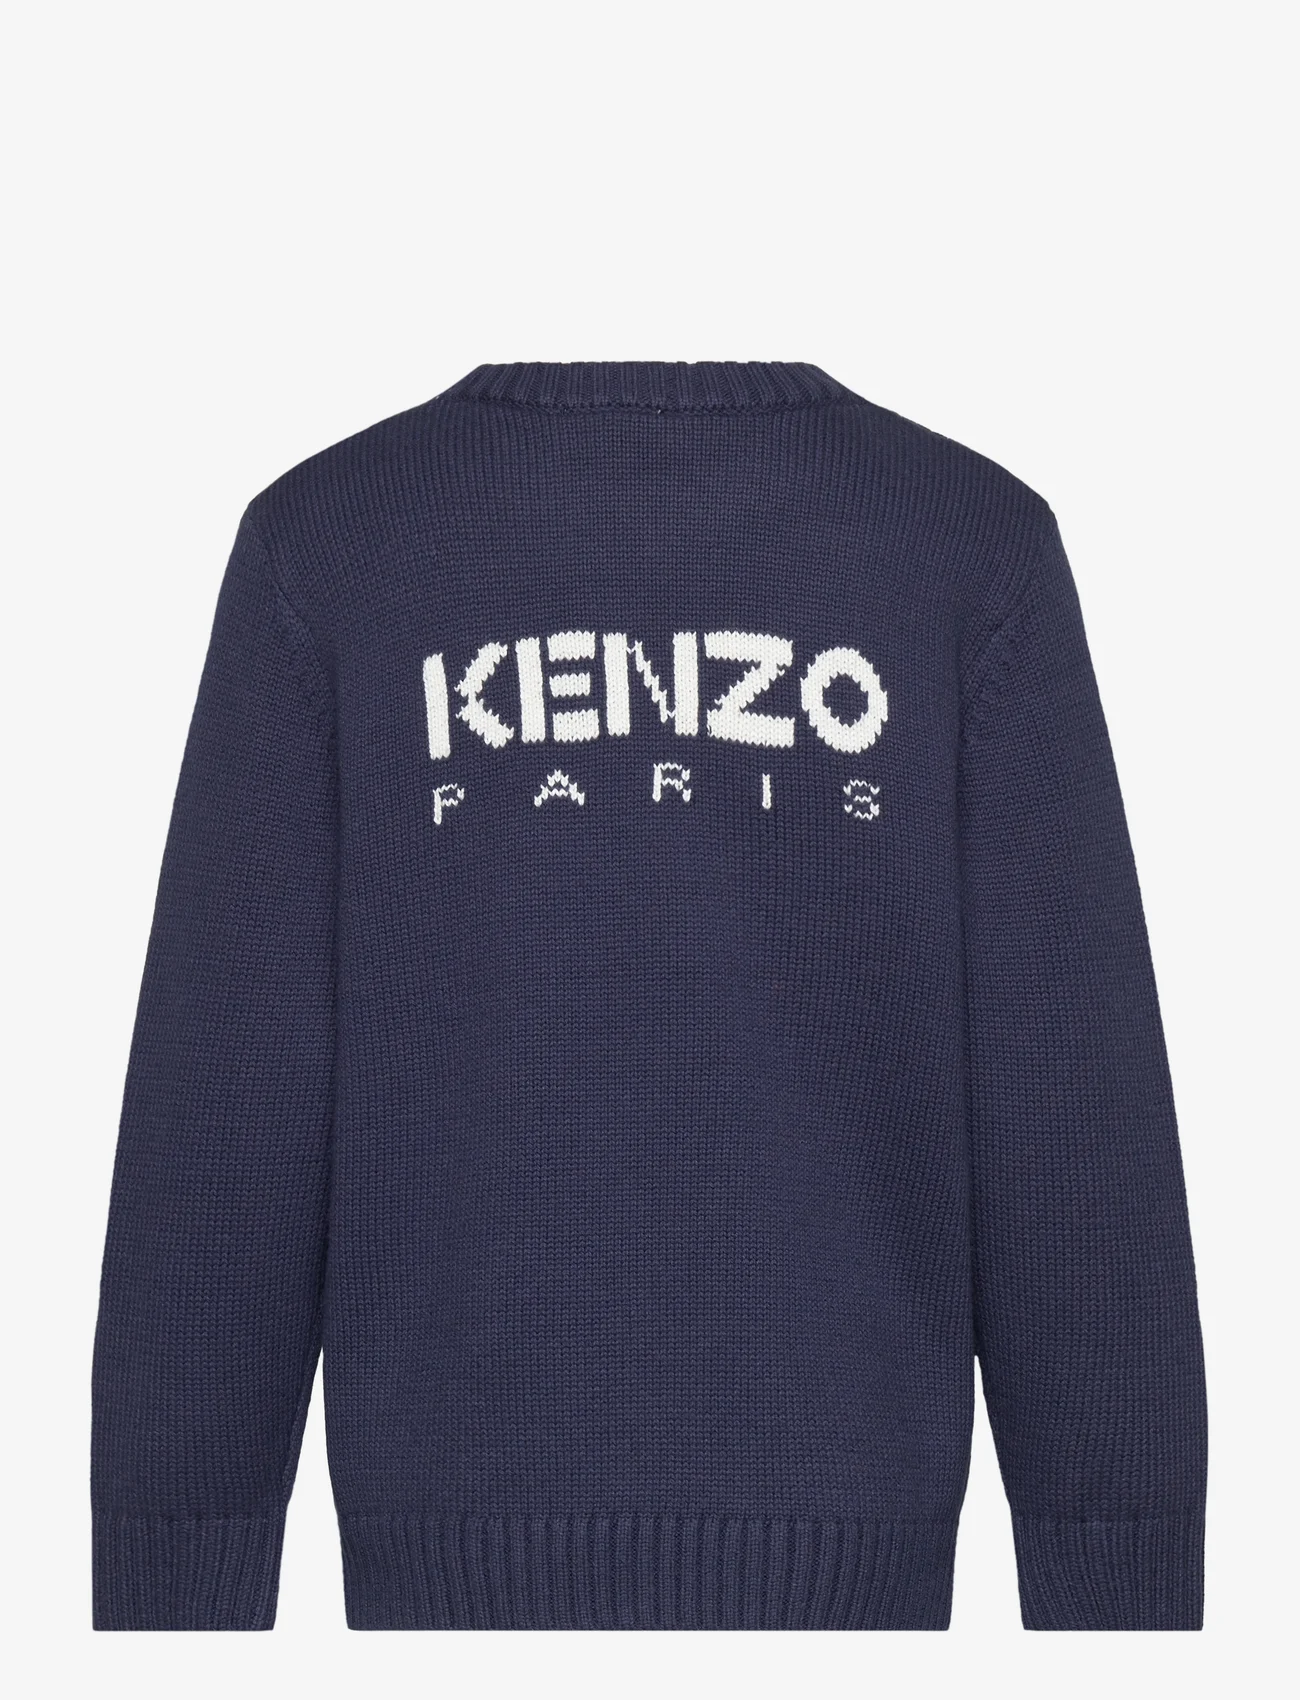 Kenzo - PULLOVER - jumpers - navy - 1